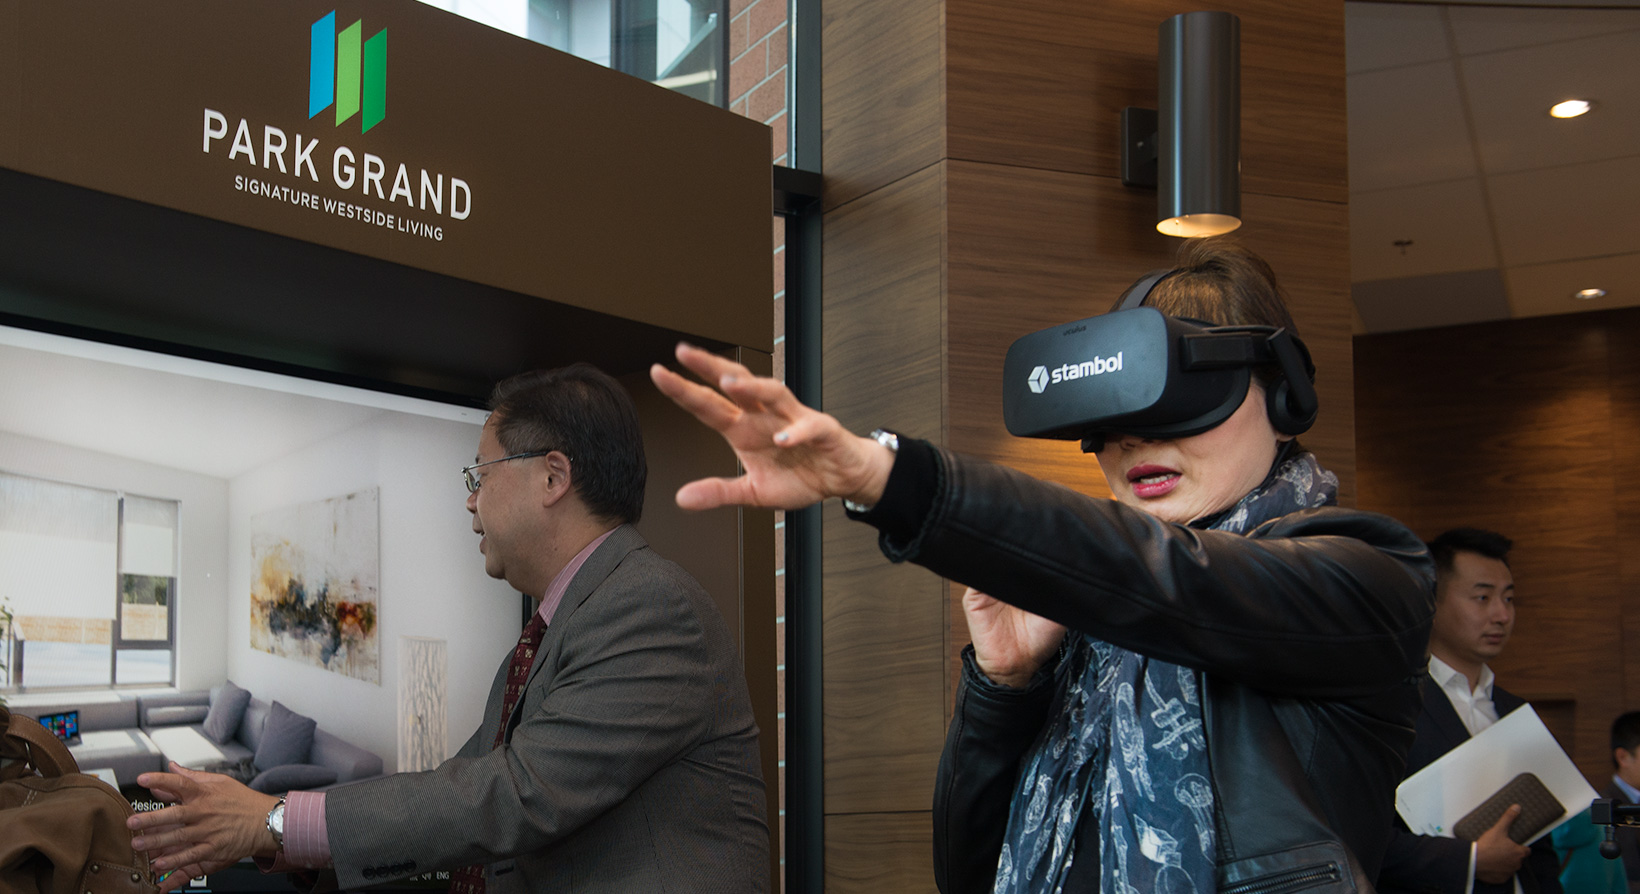 woman trying Park Grand for real estate in virtual reality by Stambol Studios